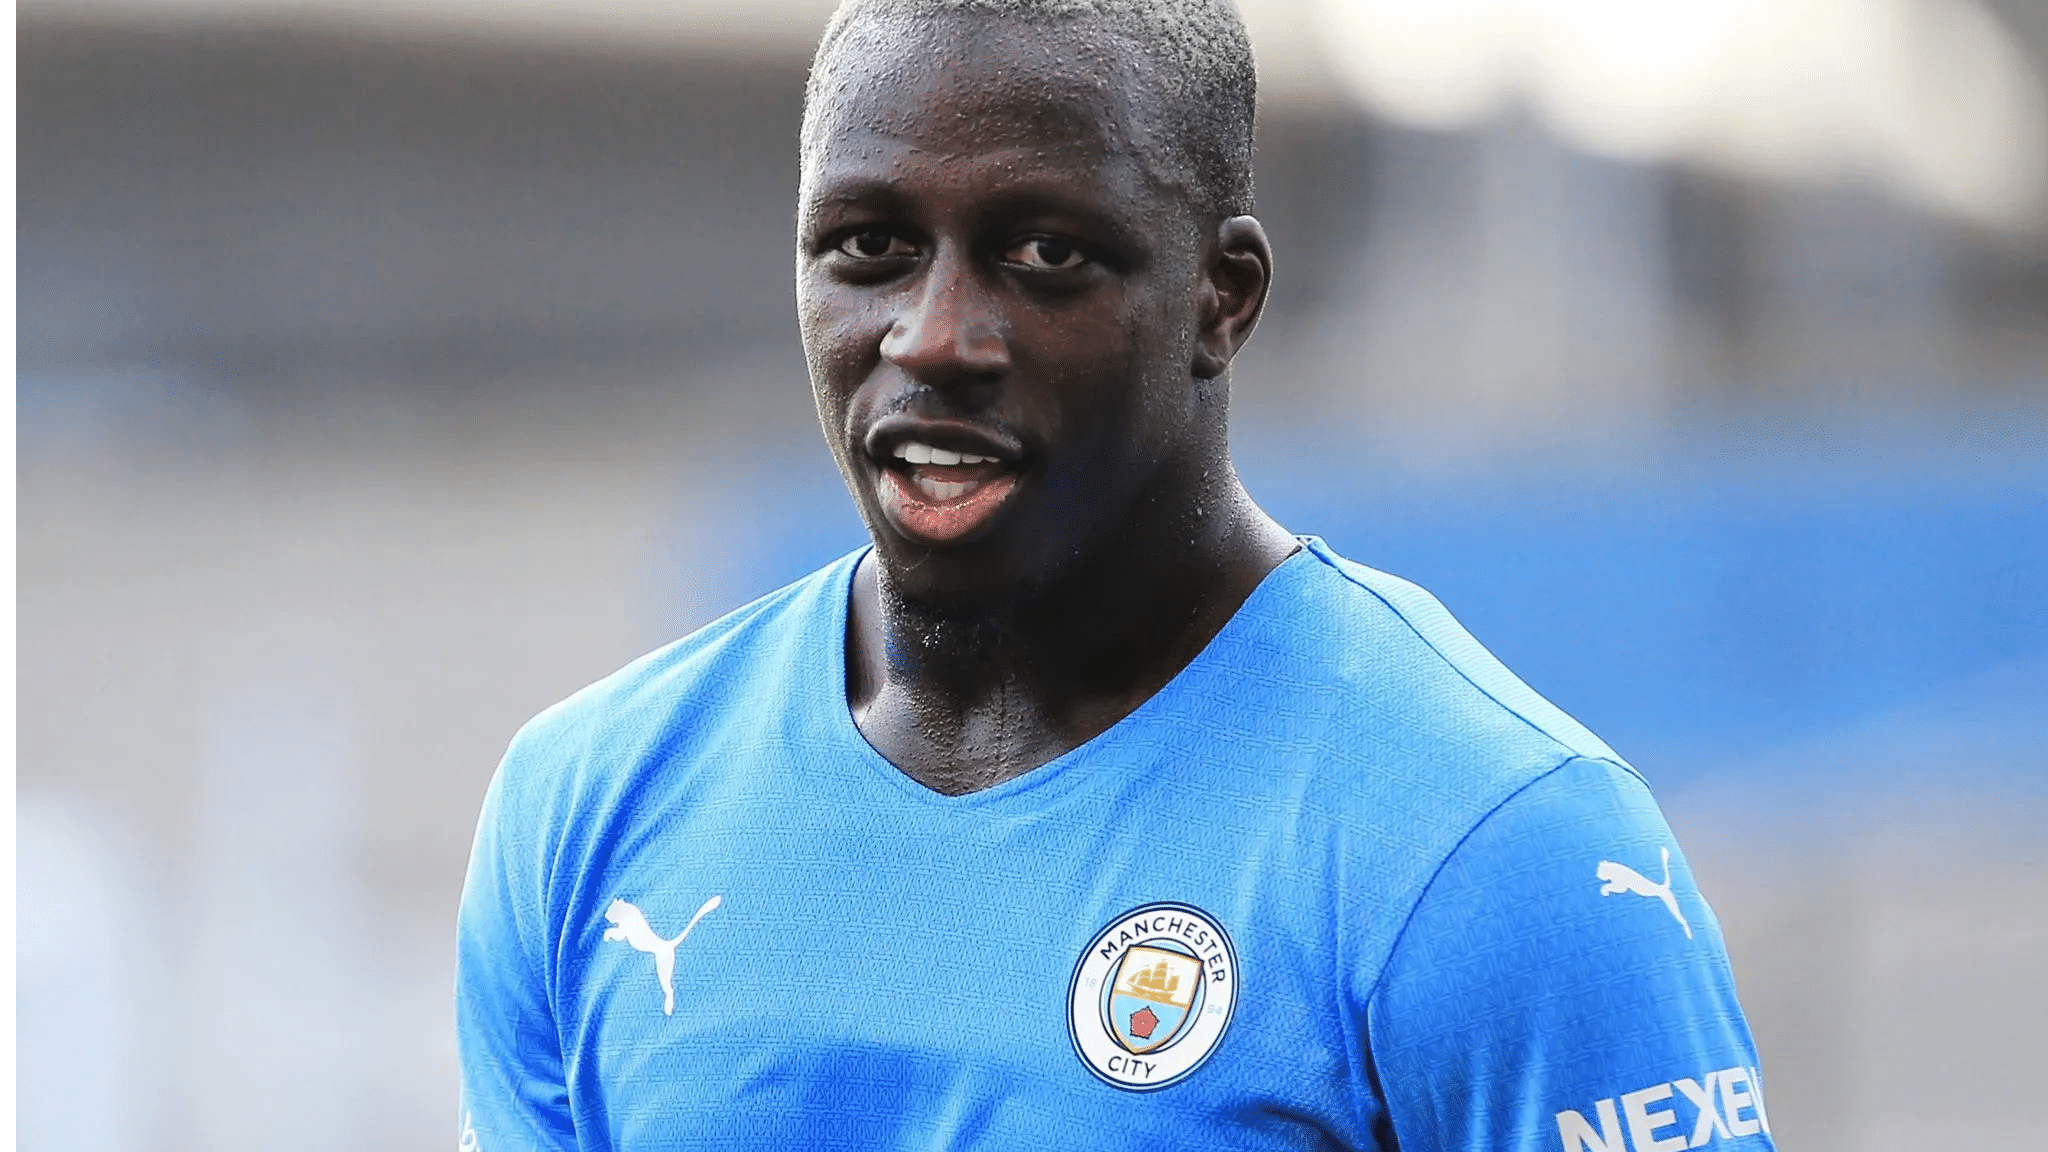 Man City suspends Benjamin Mendy over sexual assault charges